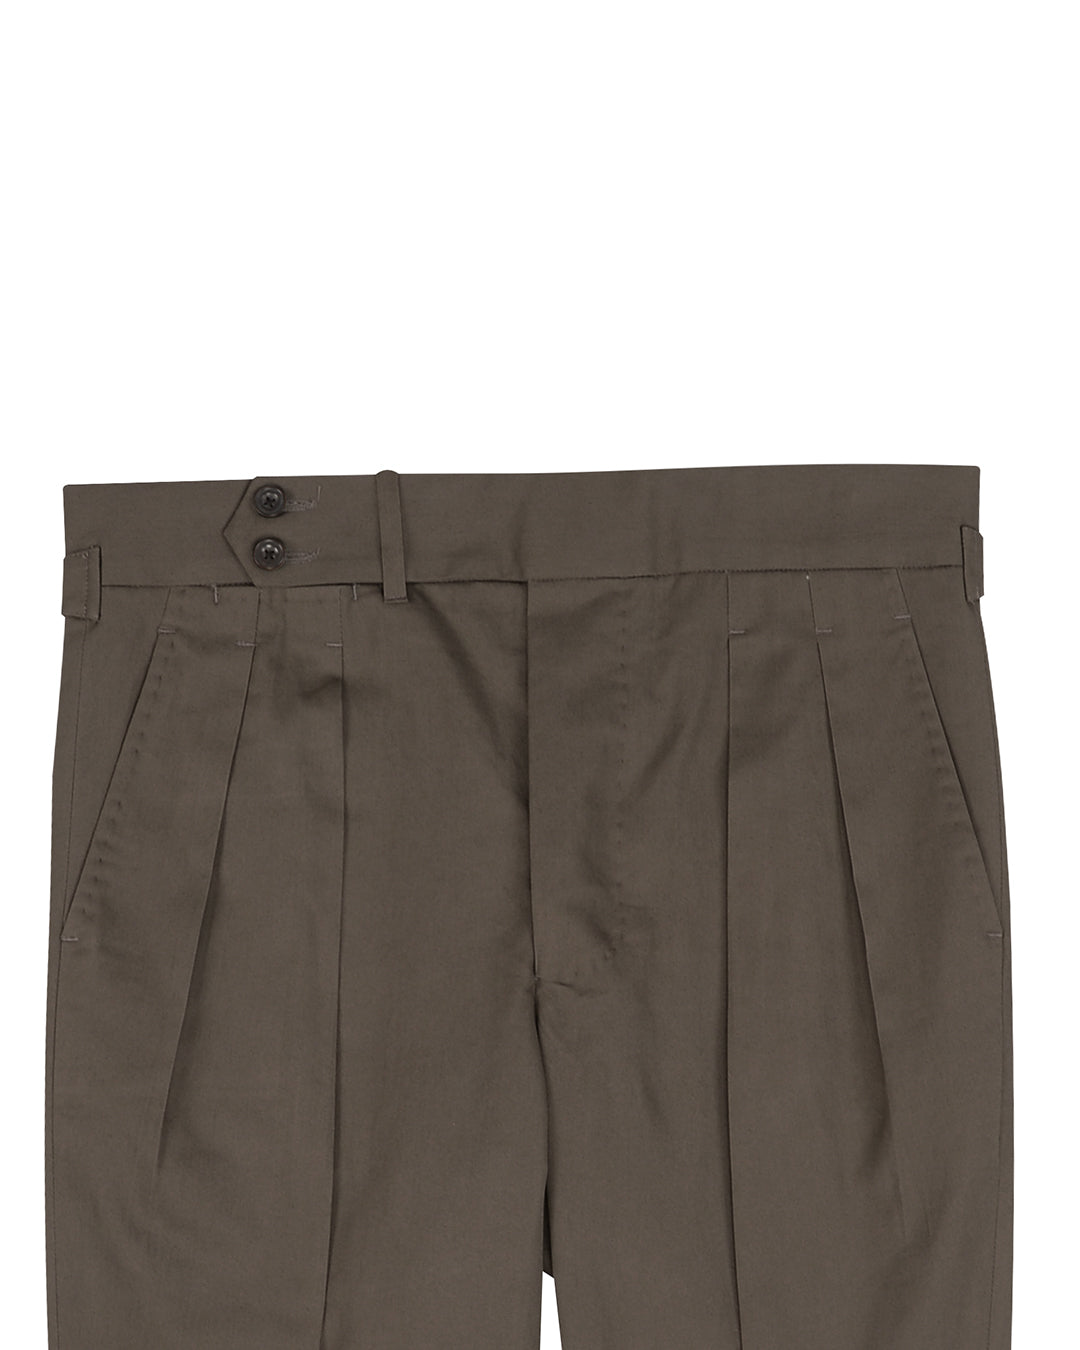 Cotton: Taupe Summer Twill